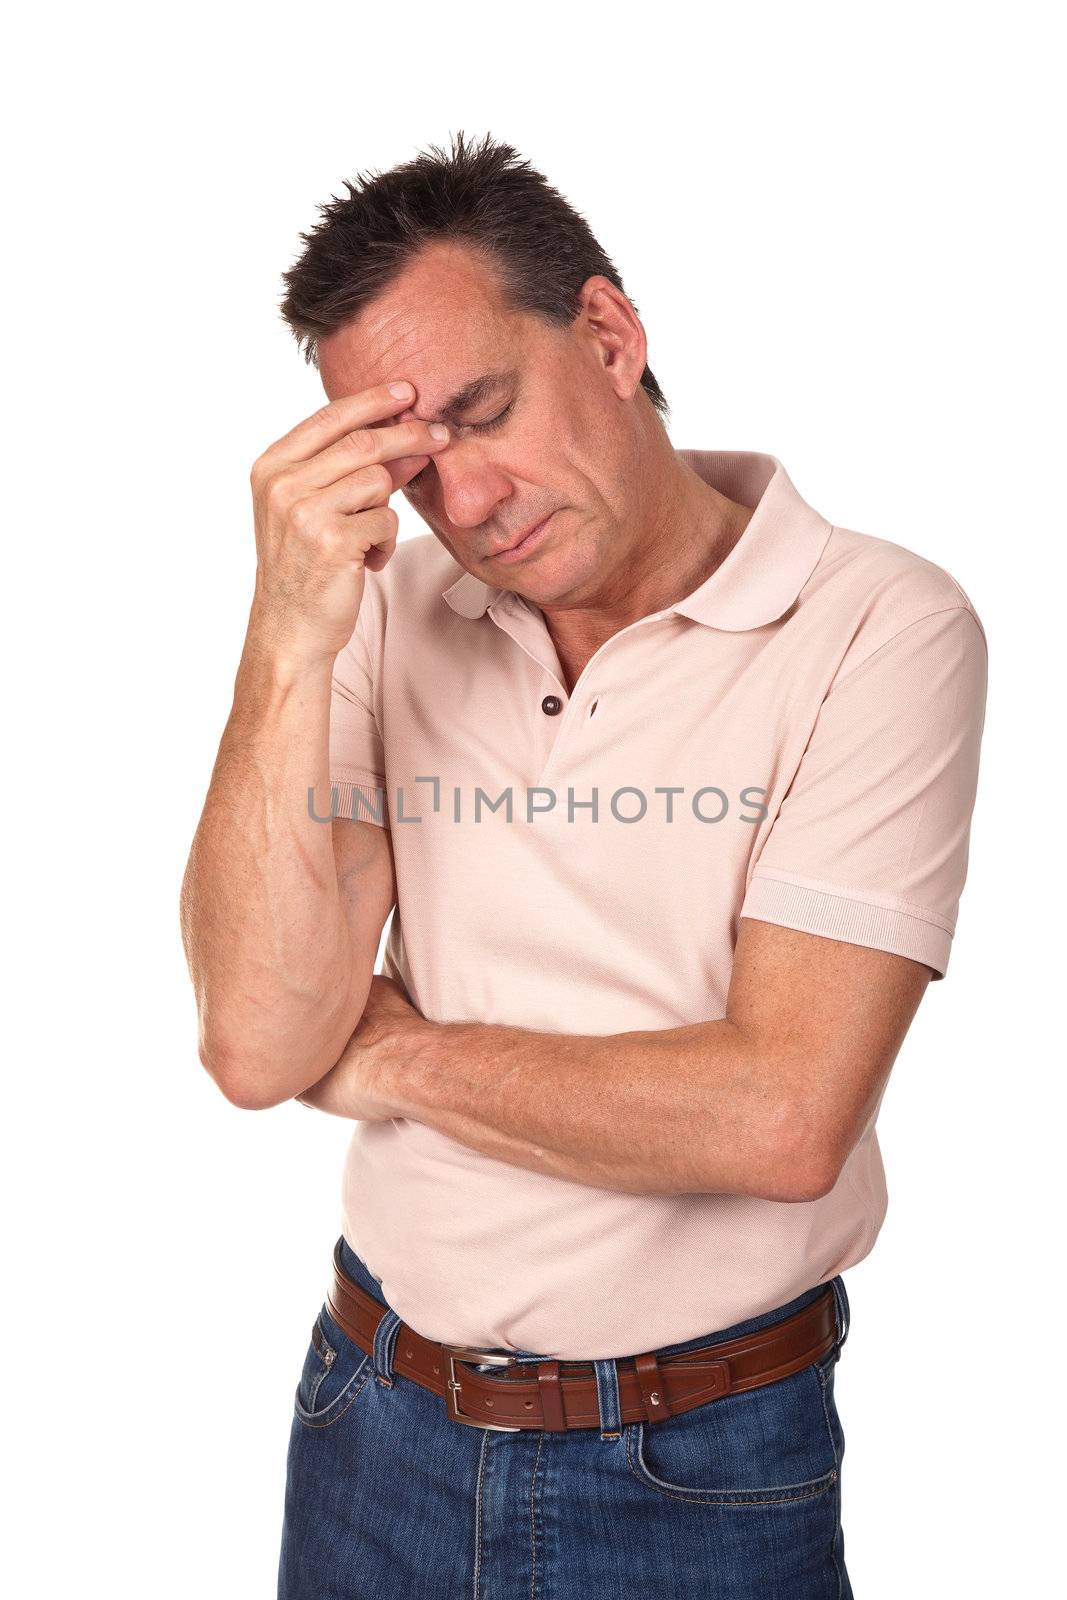 Anxious Worried Stressed Middle Age Man Holding Head in Pain Isolated